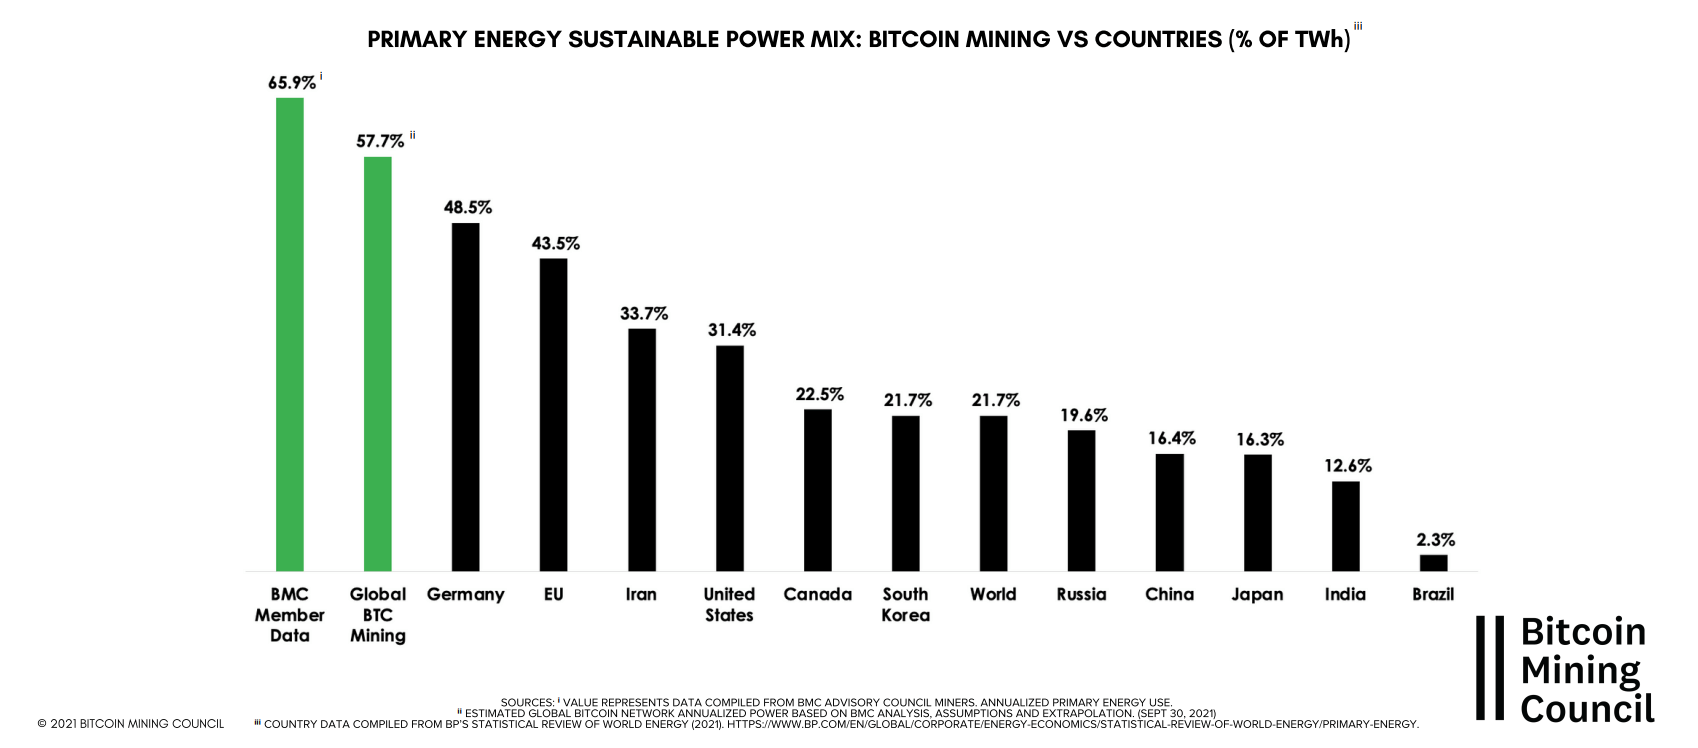 Global Bitcoin mining industry’s sustainable electricity usage has grown to 57.7%